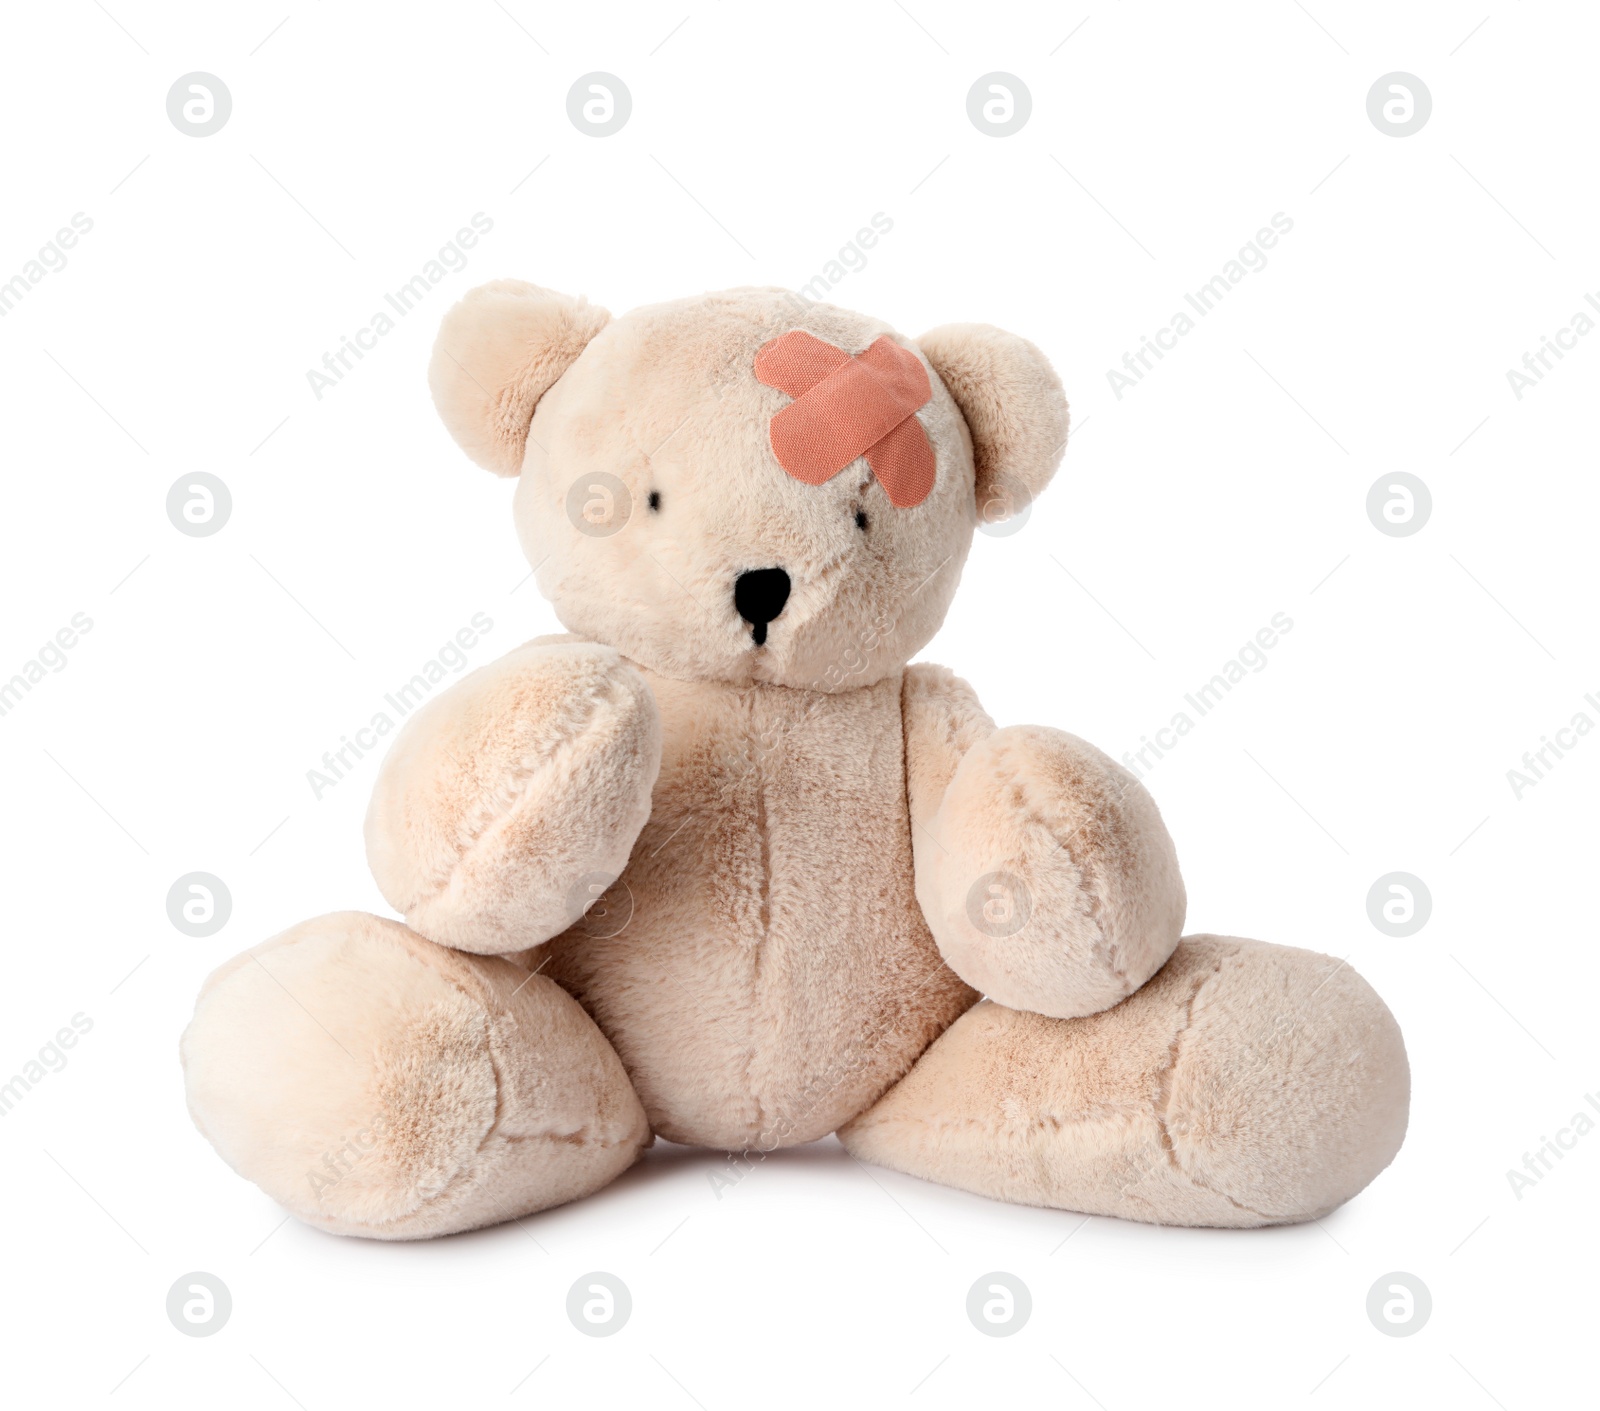 Photo of Toy Teddy bear with sticking plasters isolated on white